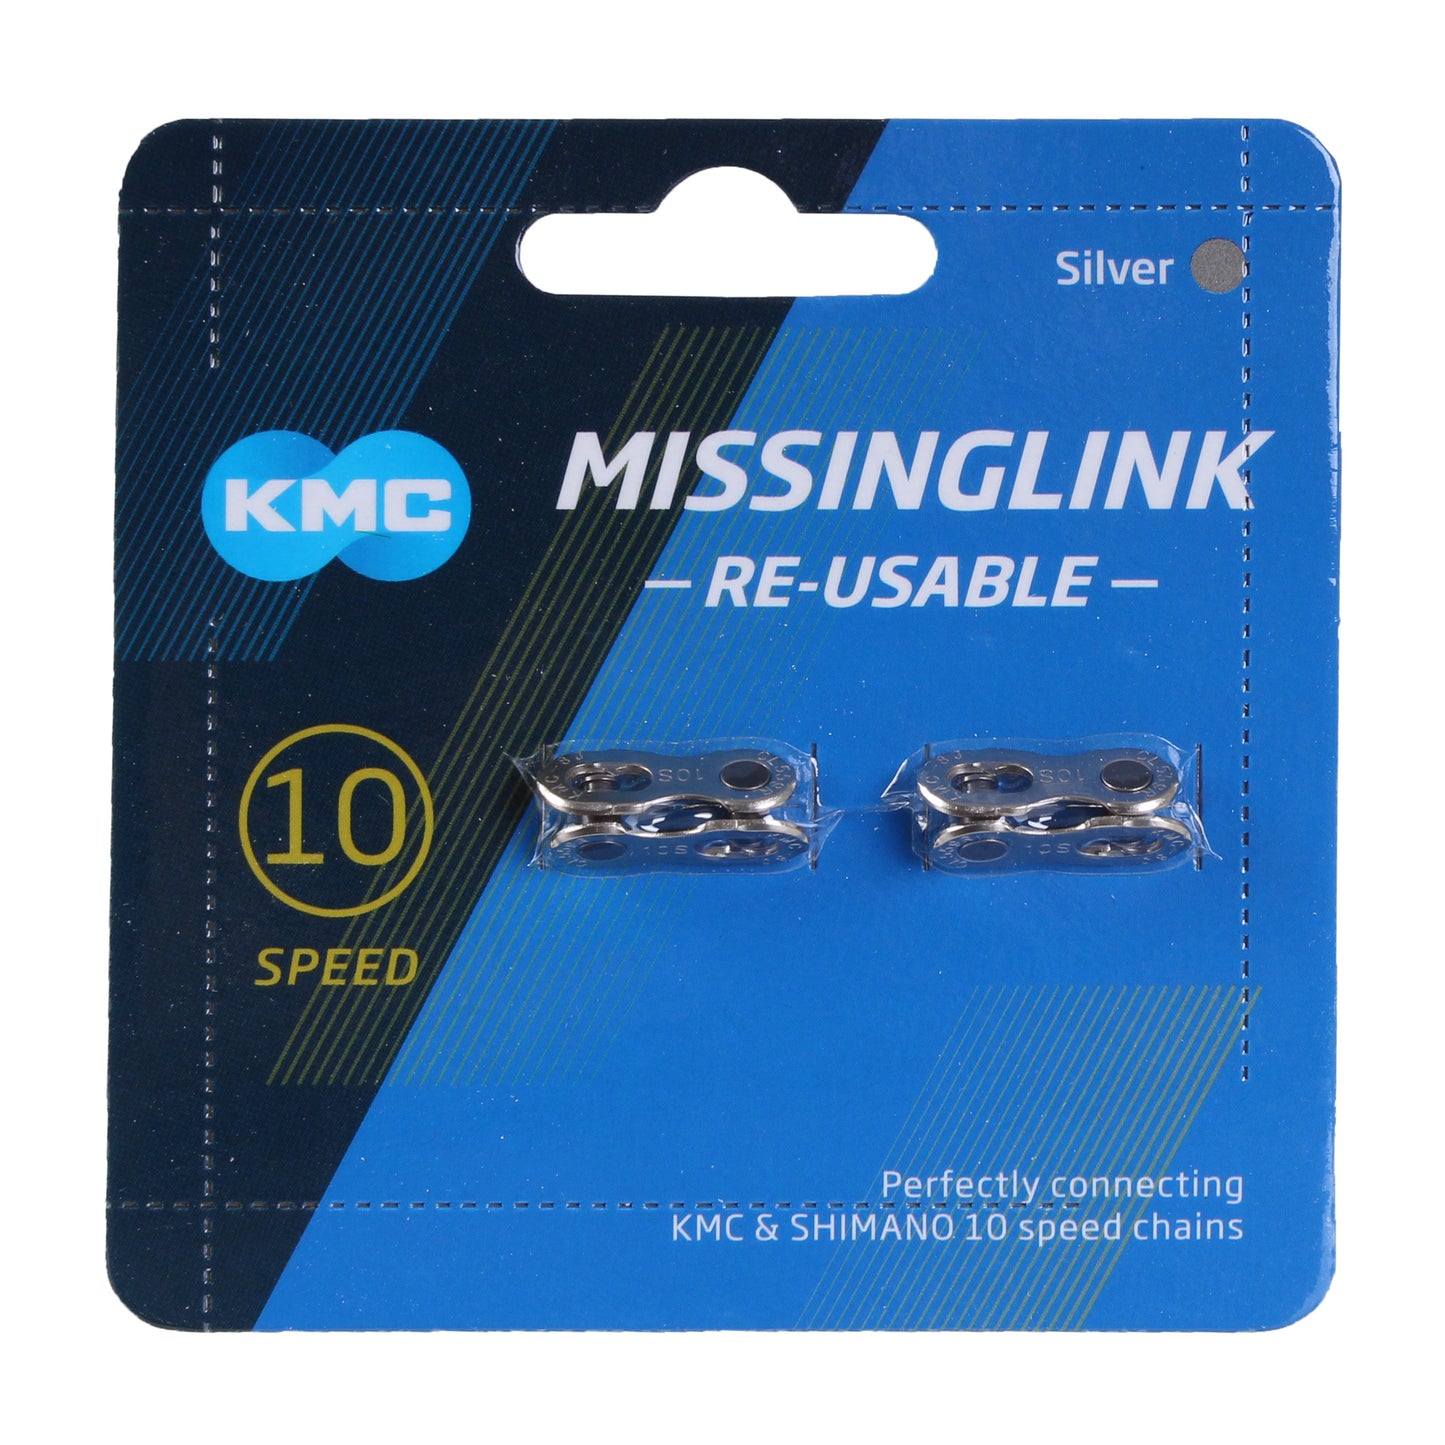 KMC Missing Link CL559R 10-Speed - Silver